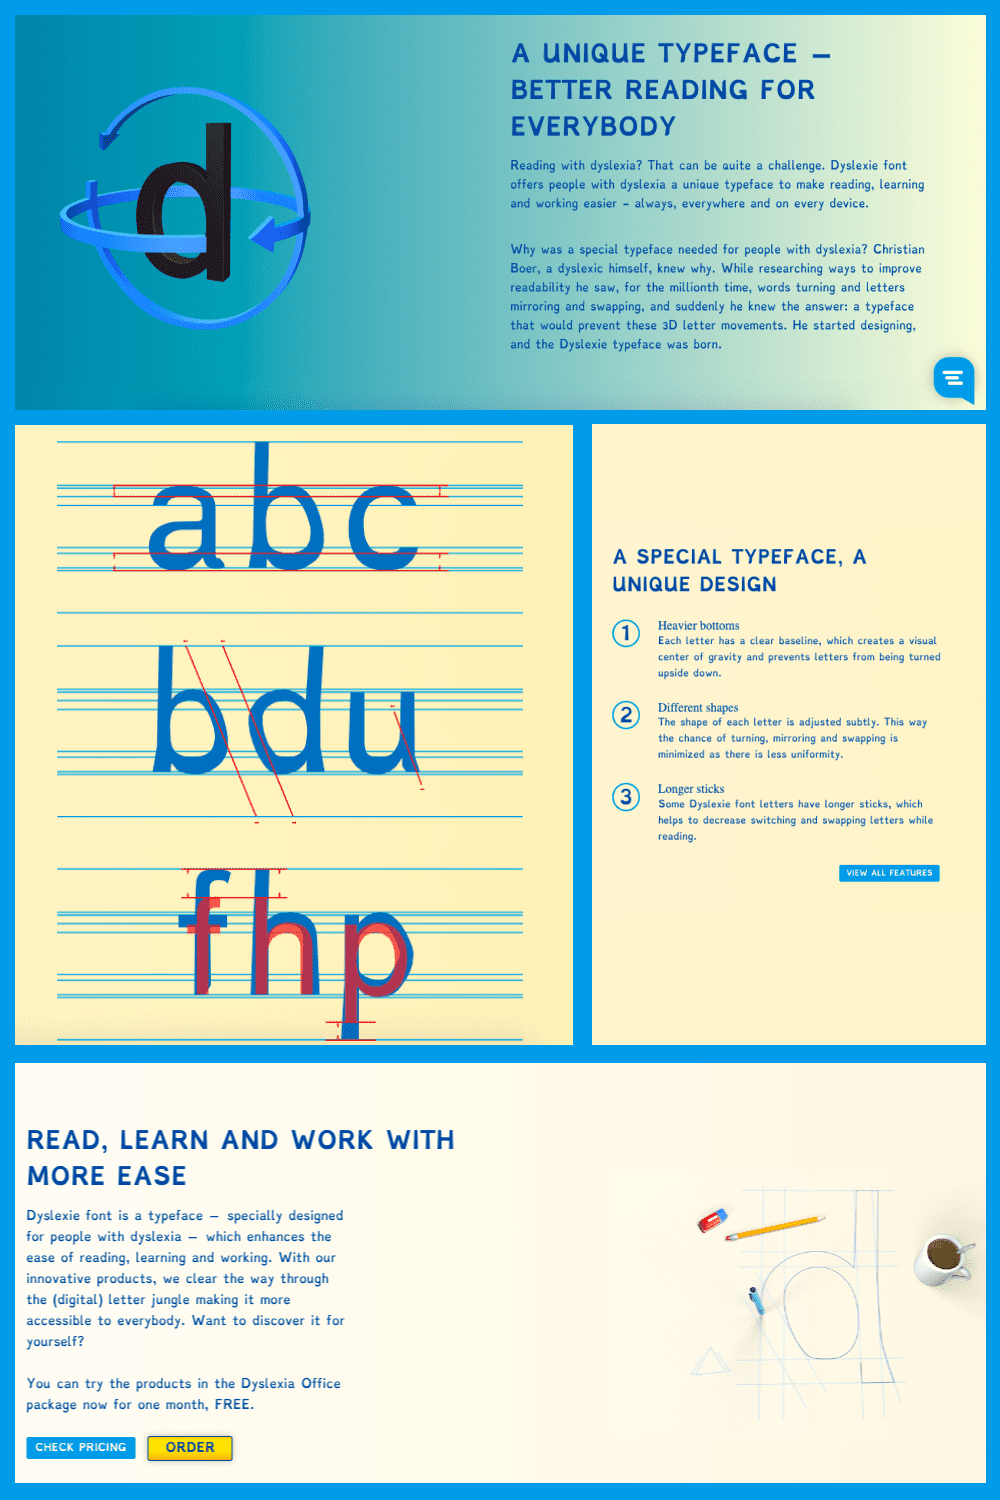 Dyslexie font is a typeface – specially designed for people with dyslexia – which enhances the ease of reading, learning and working.